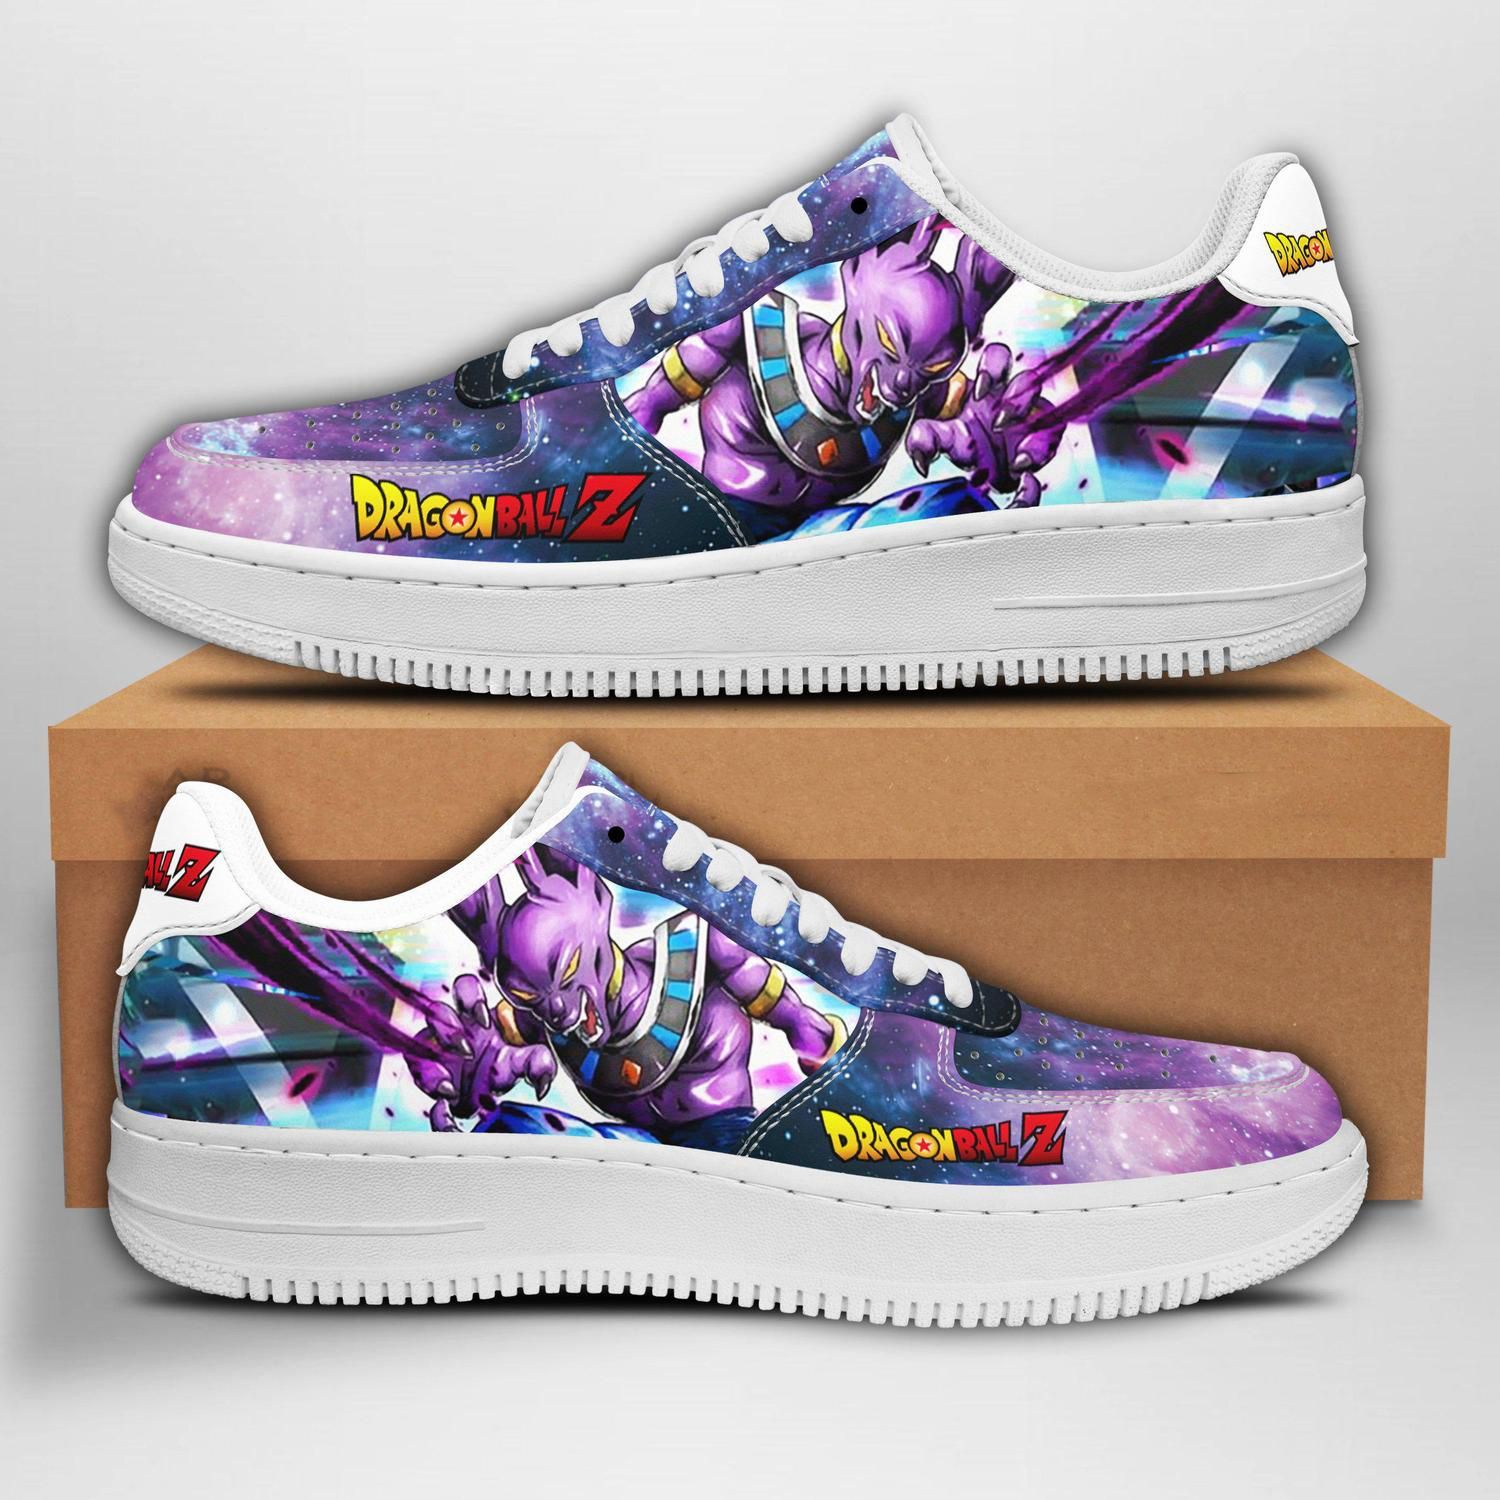 Beerus Dragon Ball Z Air Force 1 Sneaker Shoes